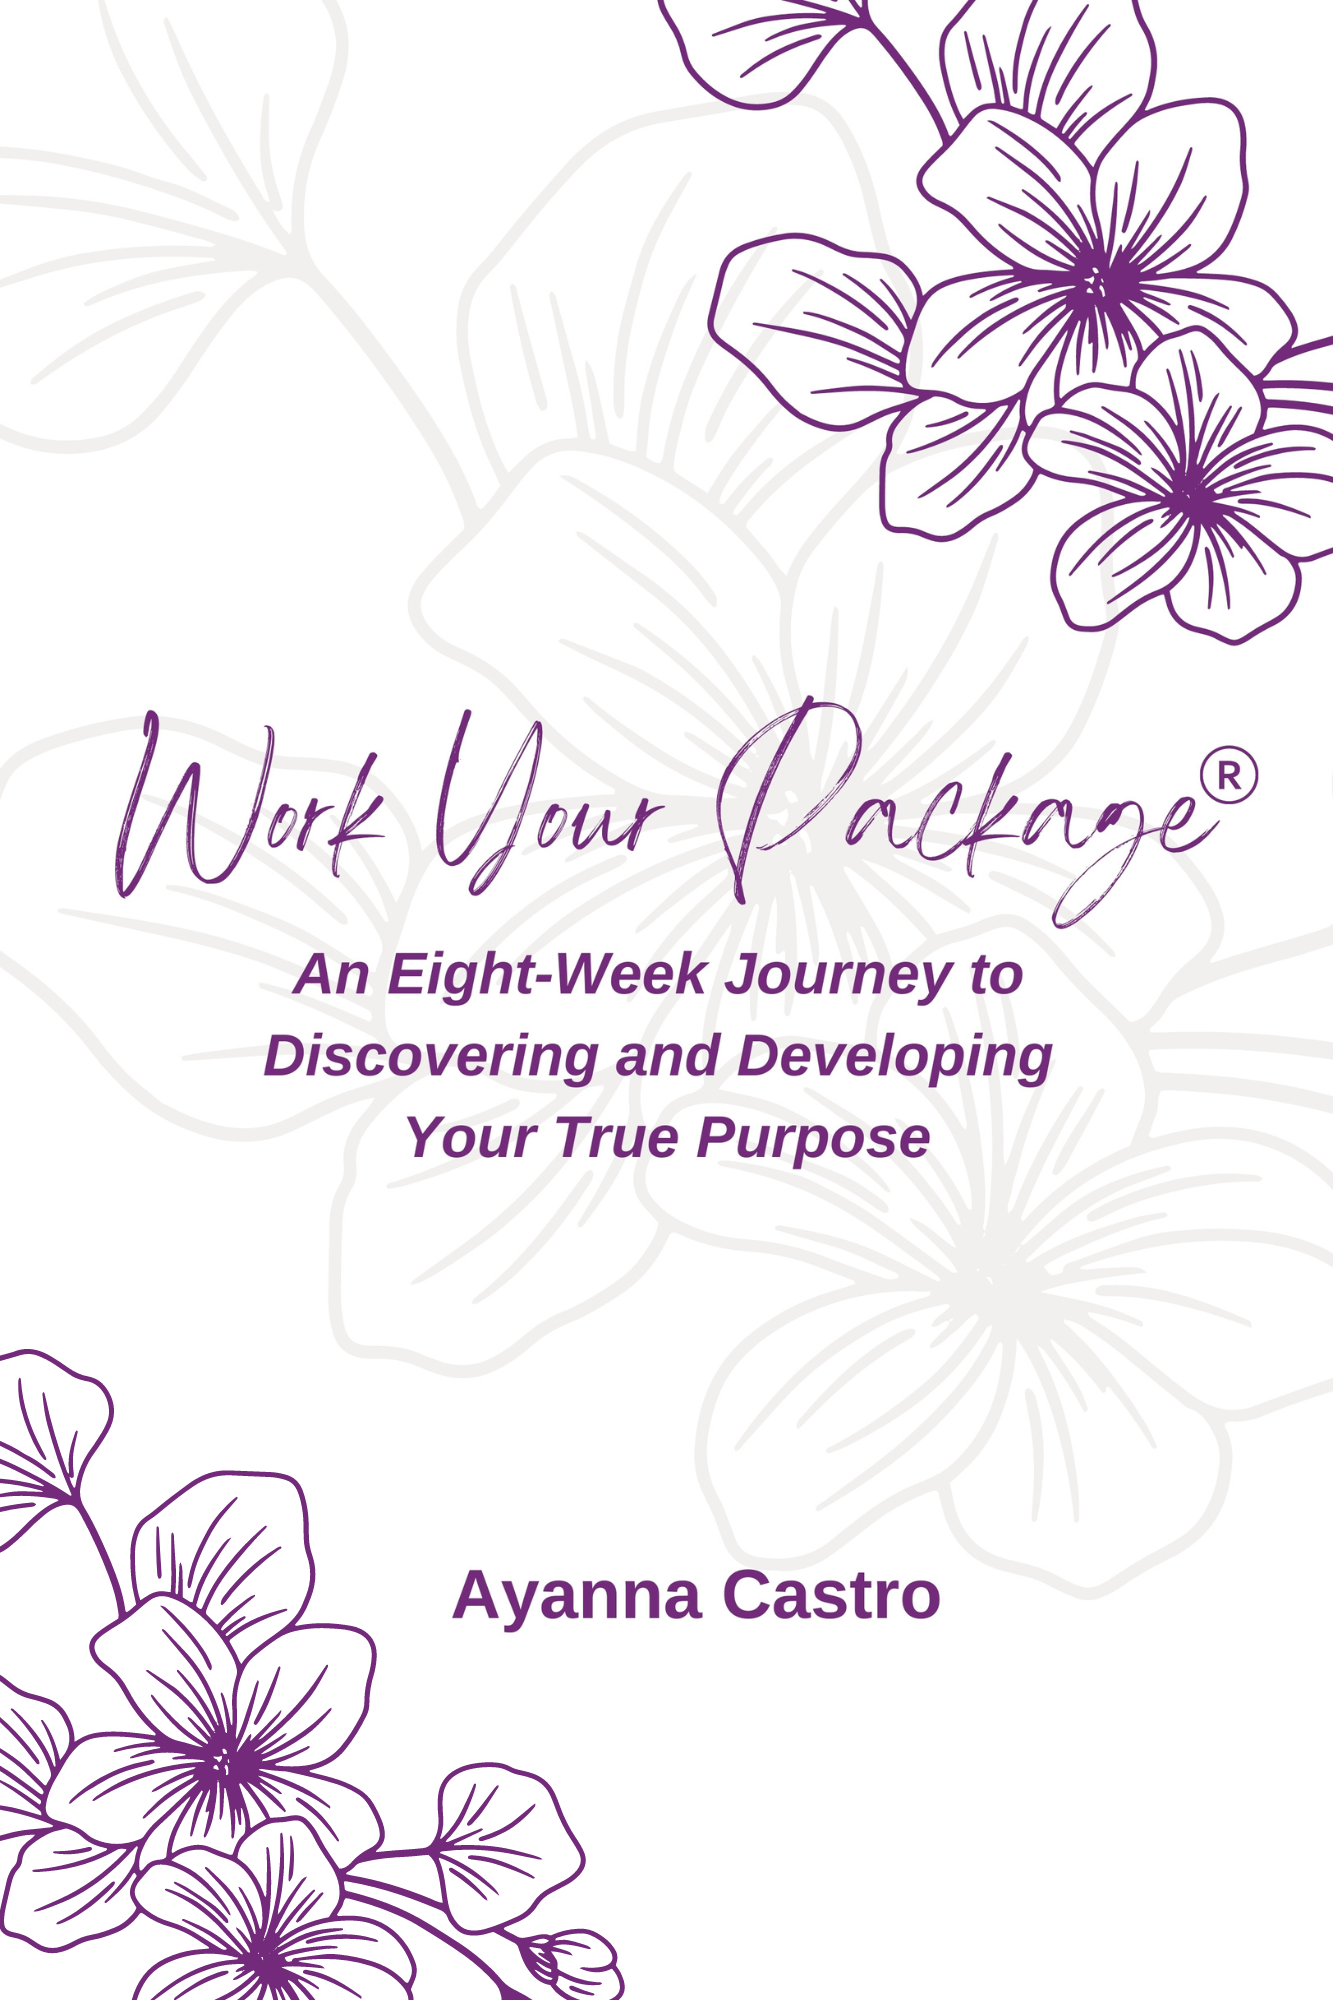 Work Your Package - An Eight- Week Journey to Discovering and Developing Your True Purpose